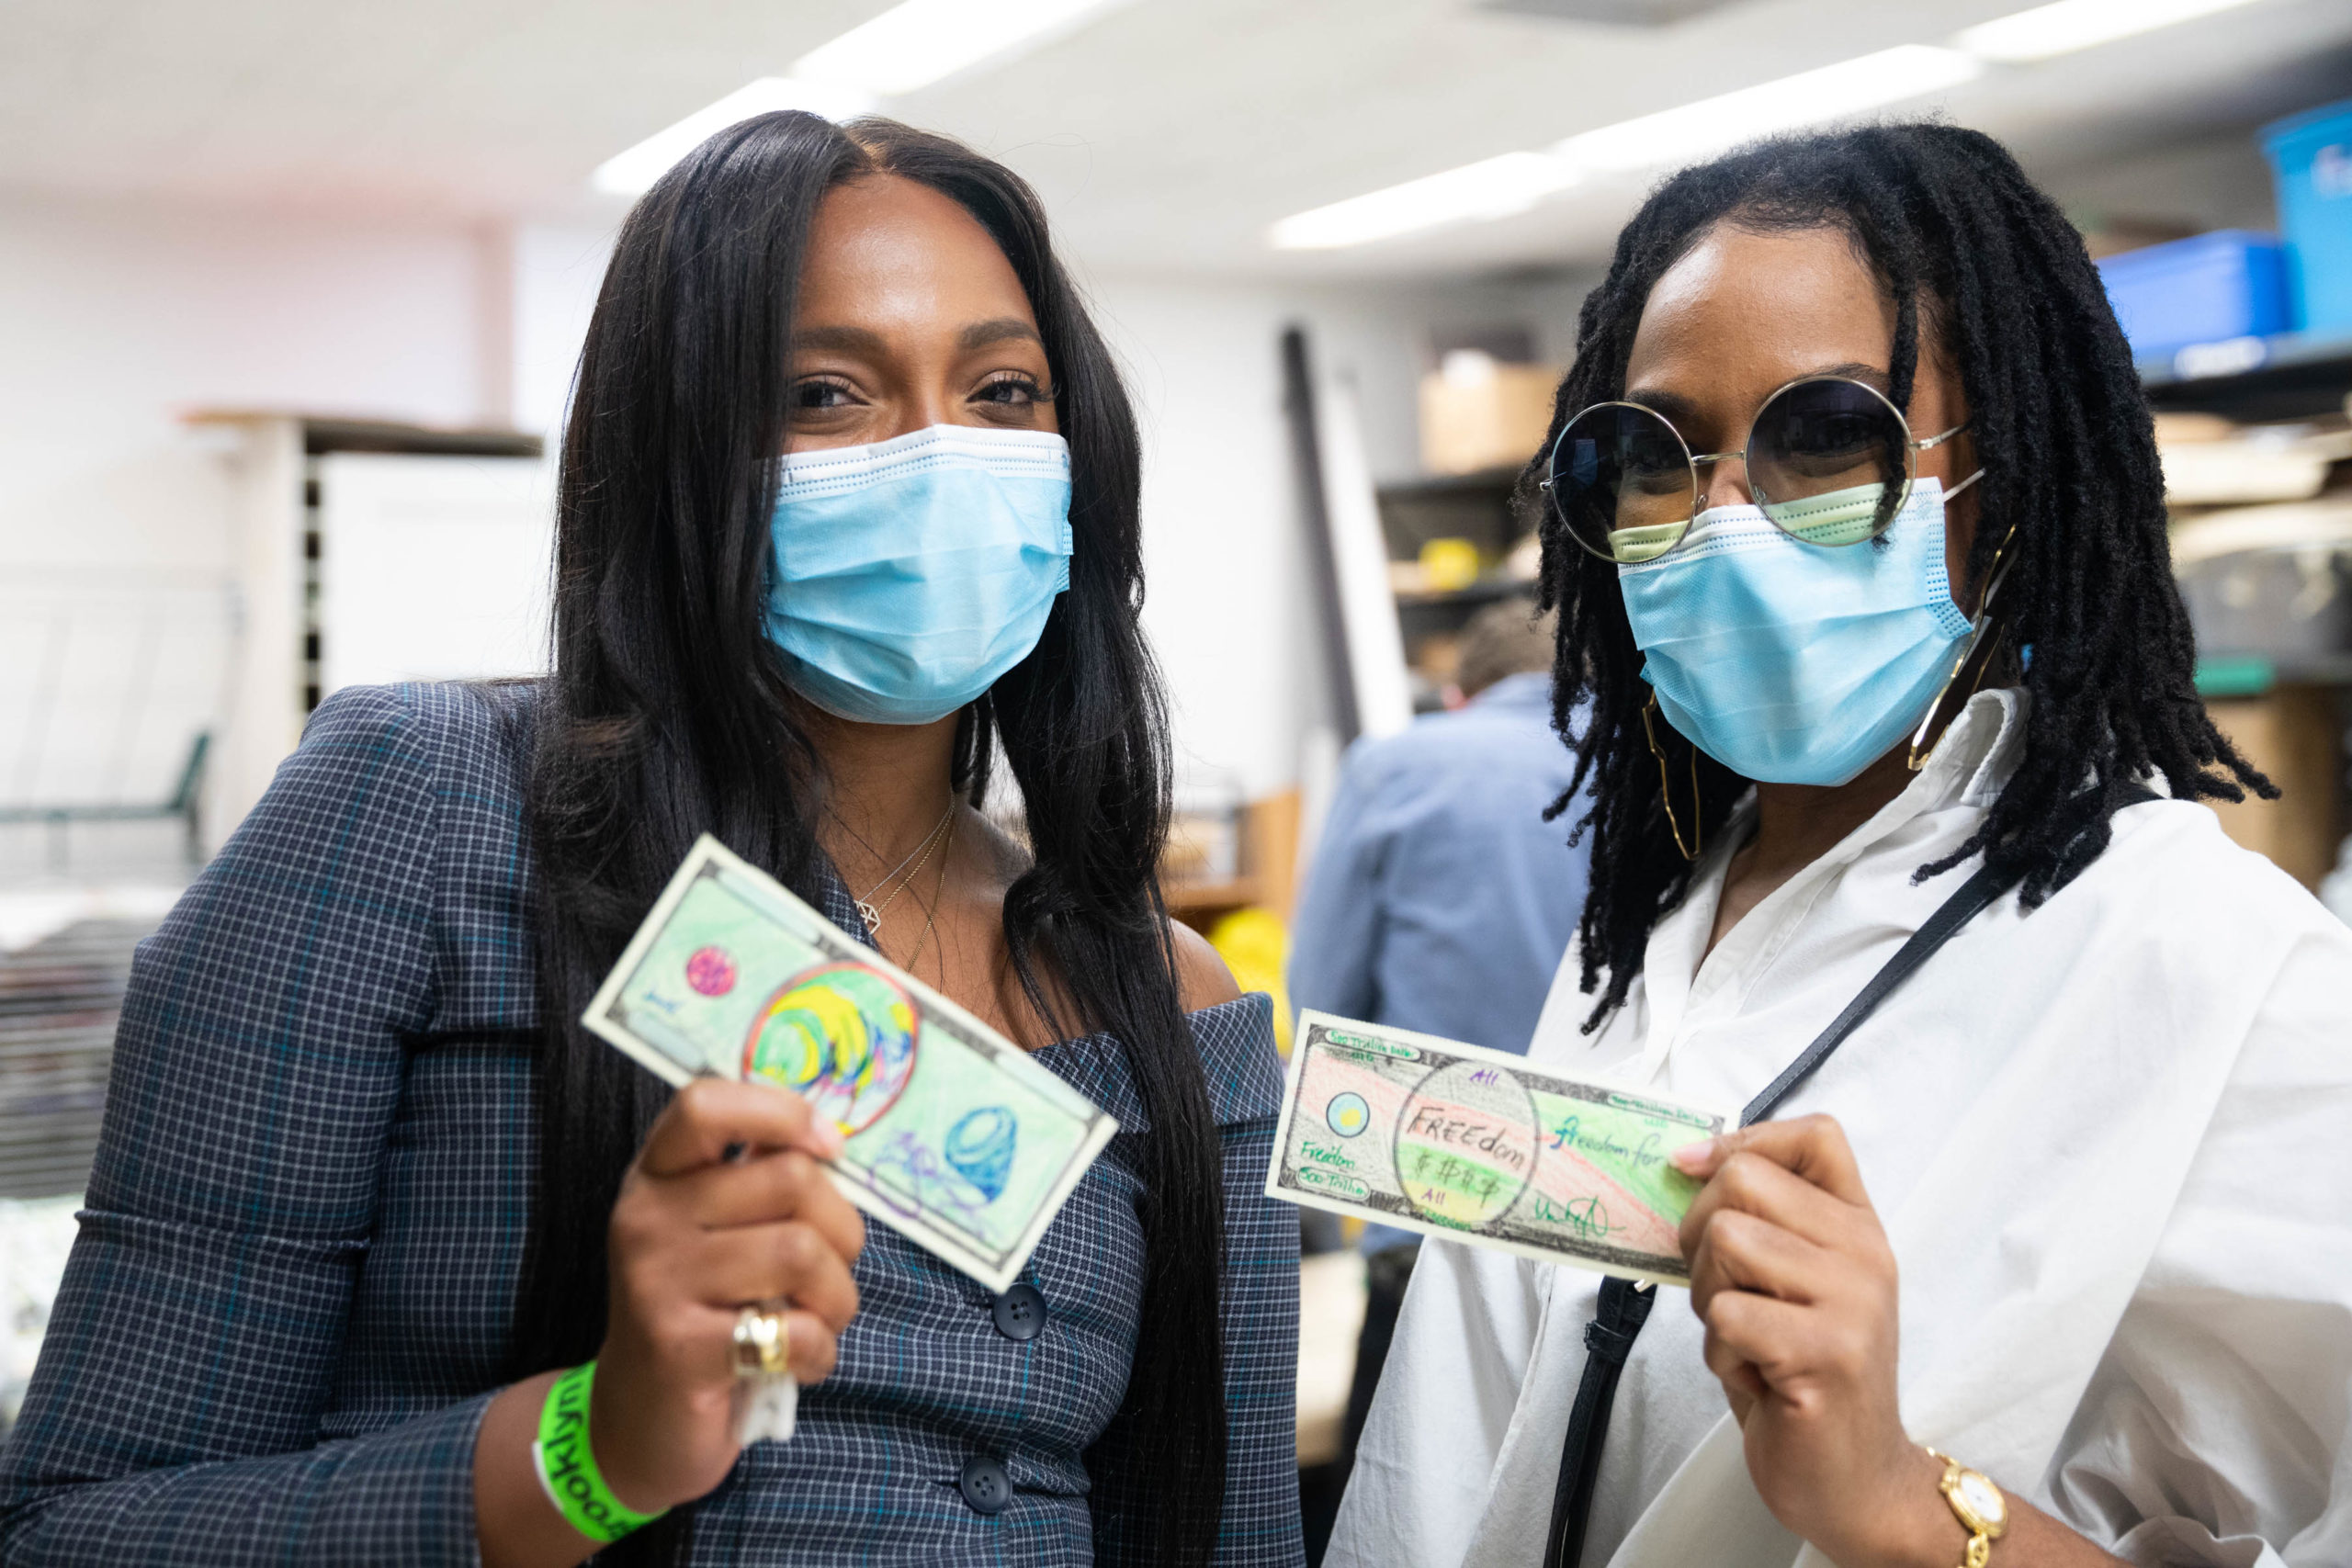 Two people indoors wearing masks and holding up Fundred Dollar Bills.